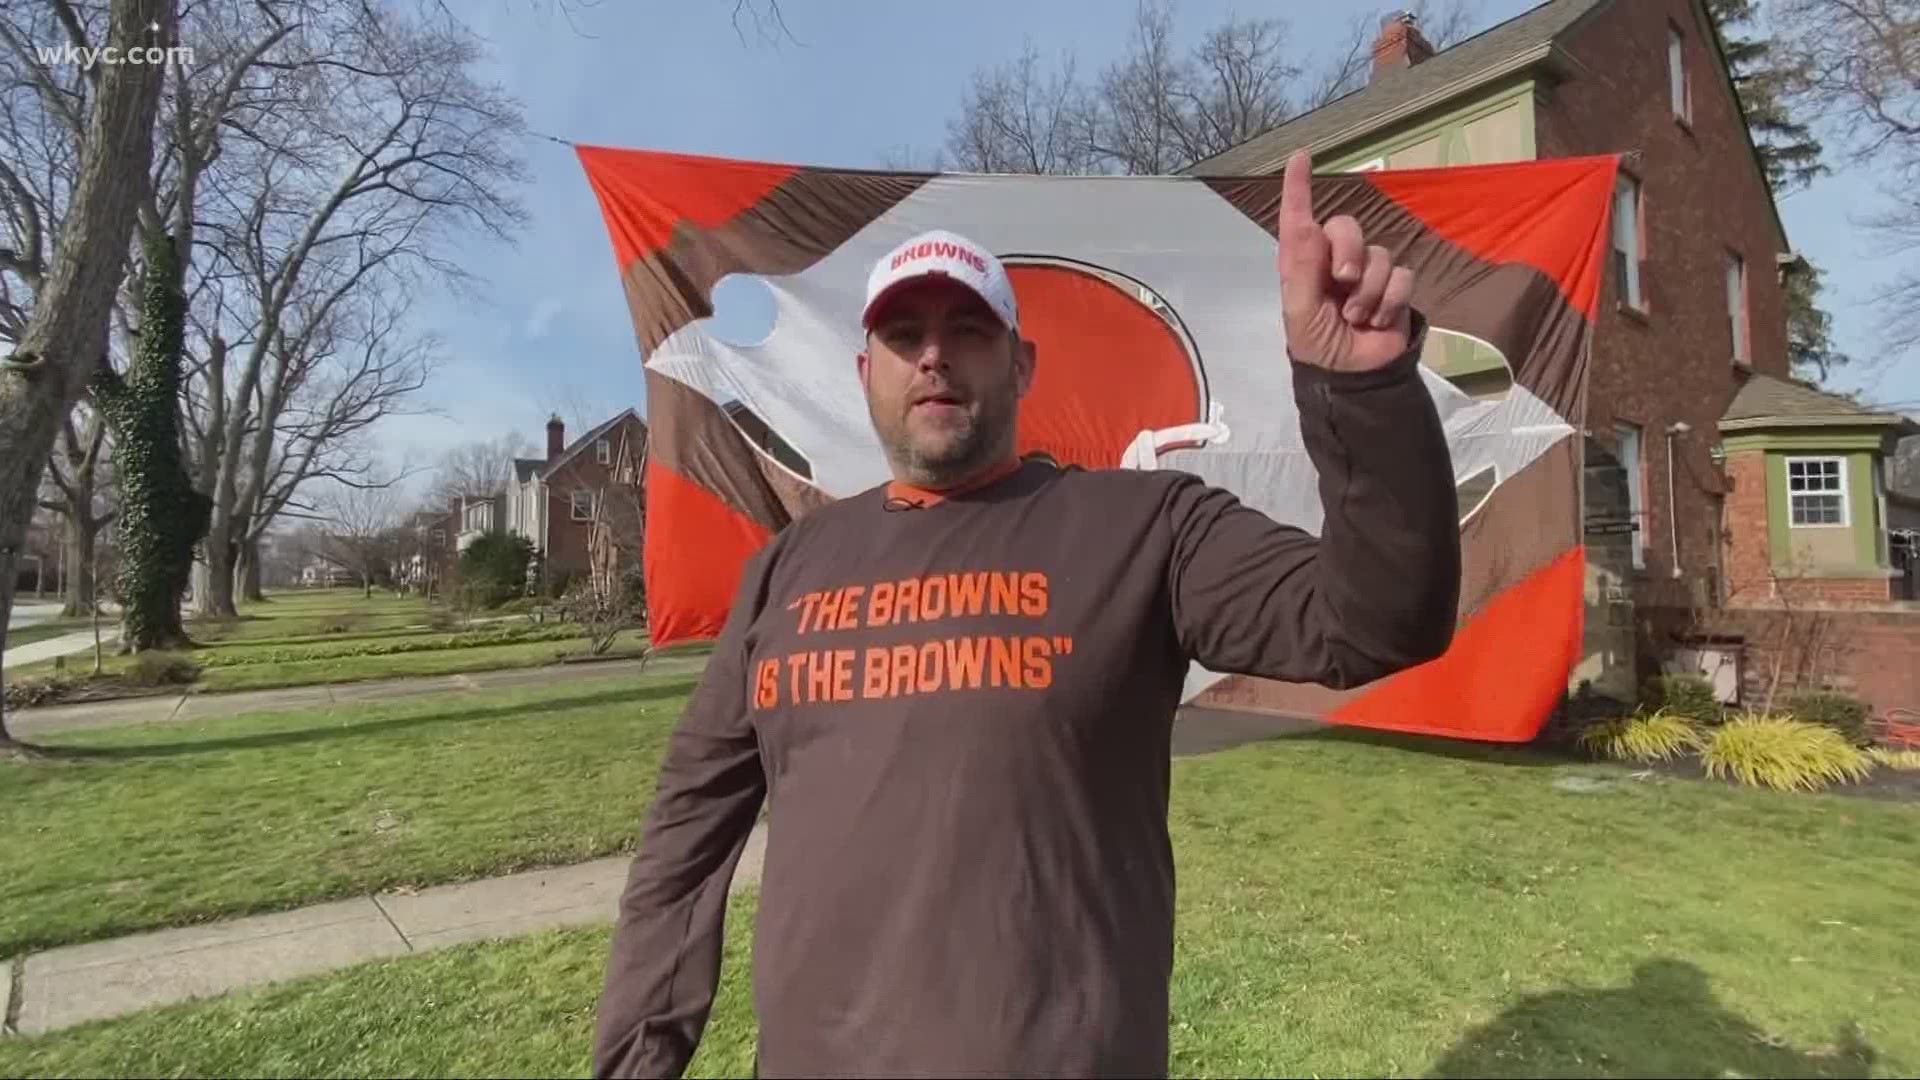 Jan. 15, 2021. Meet 'Danny Cleveland.' This Browns fan is showing his support for the team in a BIG way -- with a giant flag flying outside of his home.